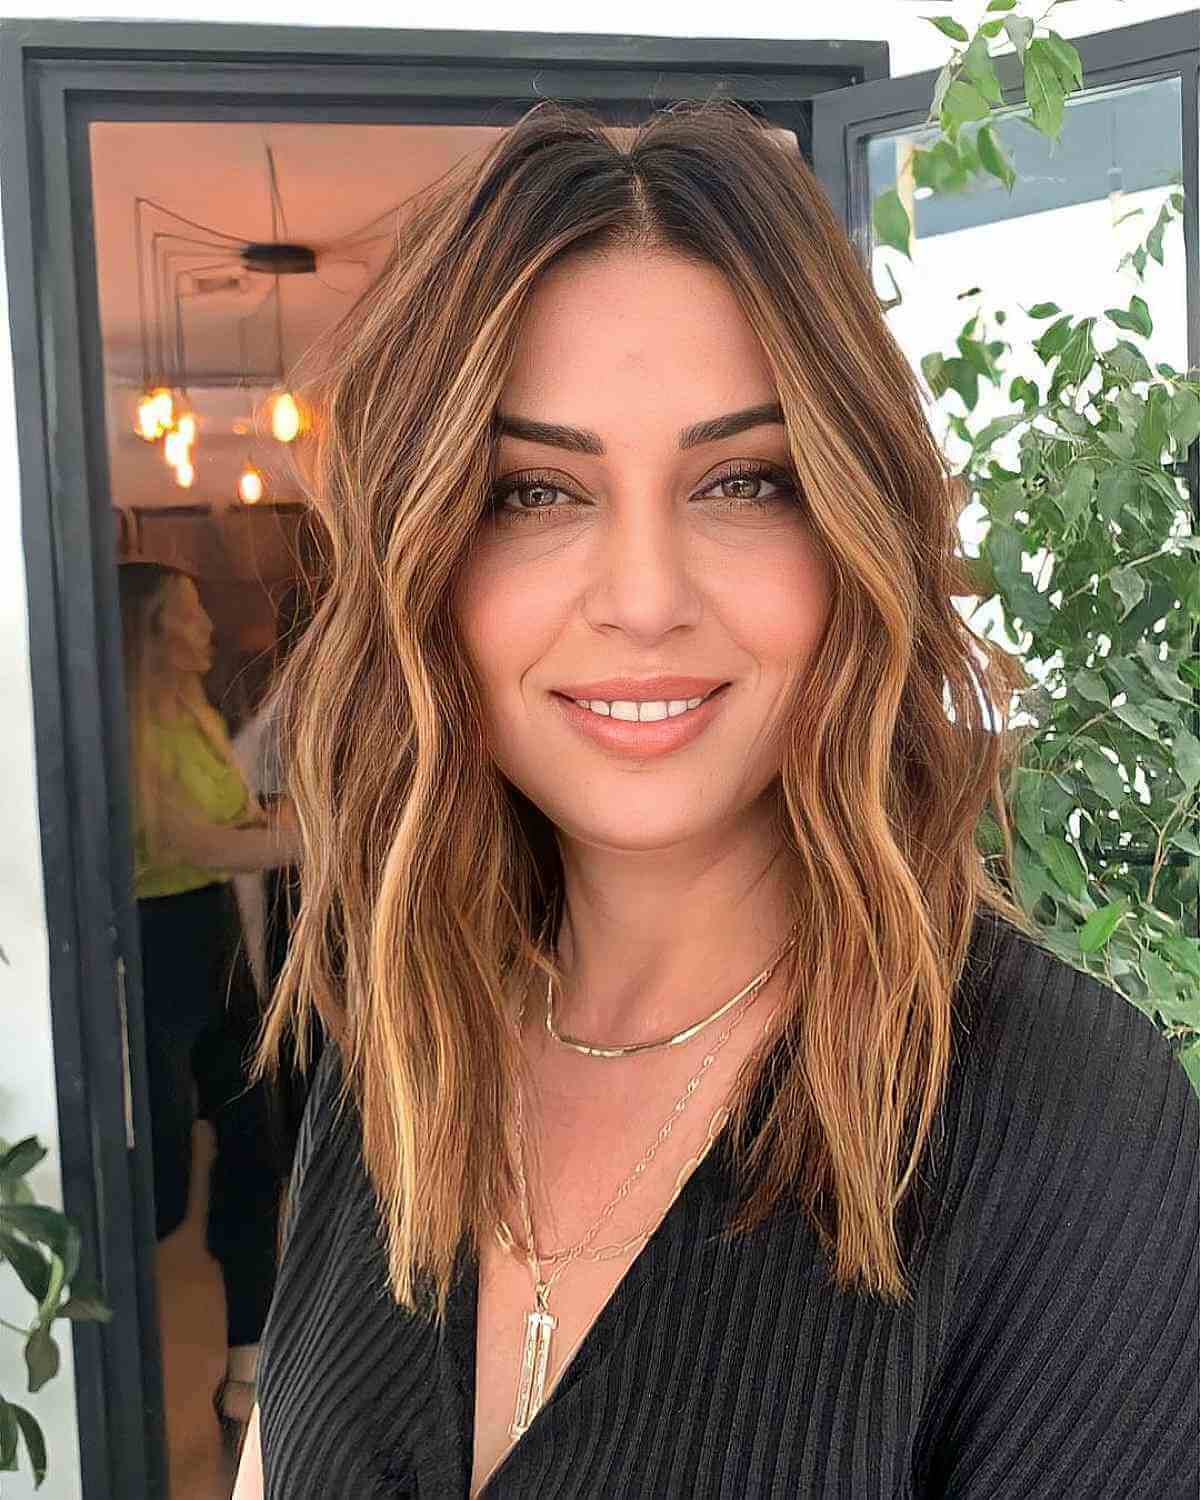 Sun-Kissed Medium-Length Hair for Ladies 40 and Over